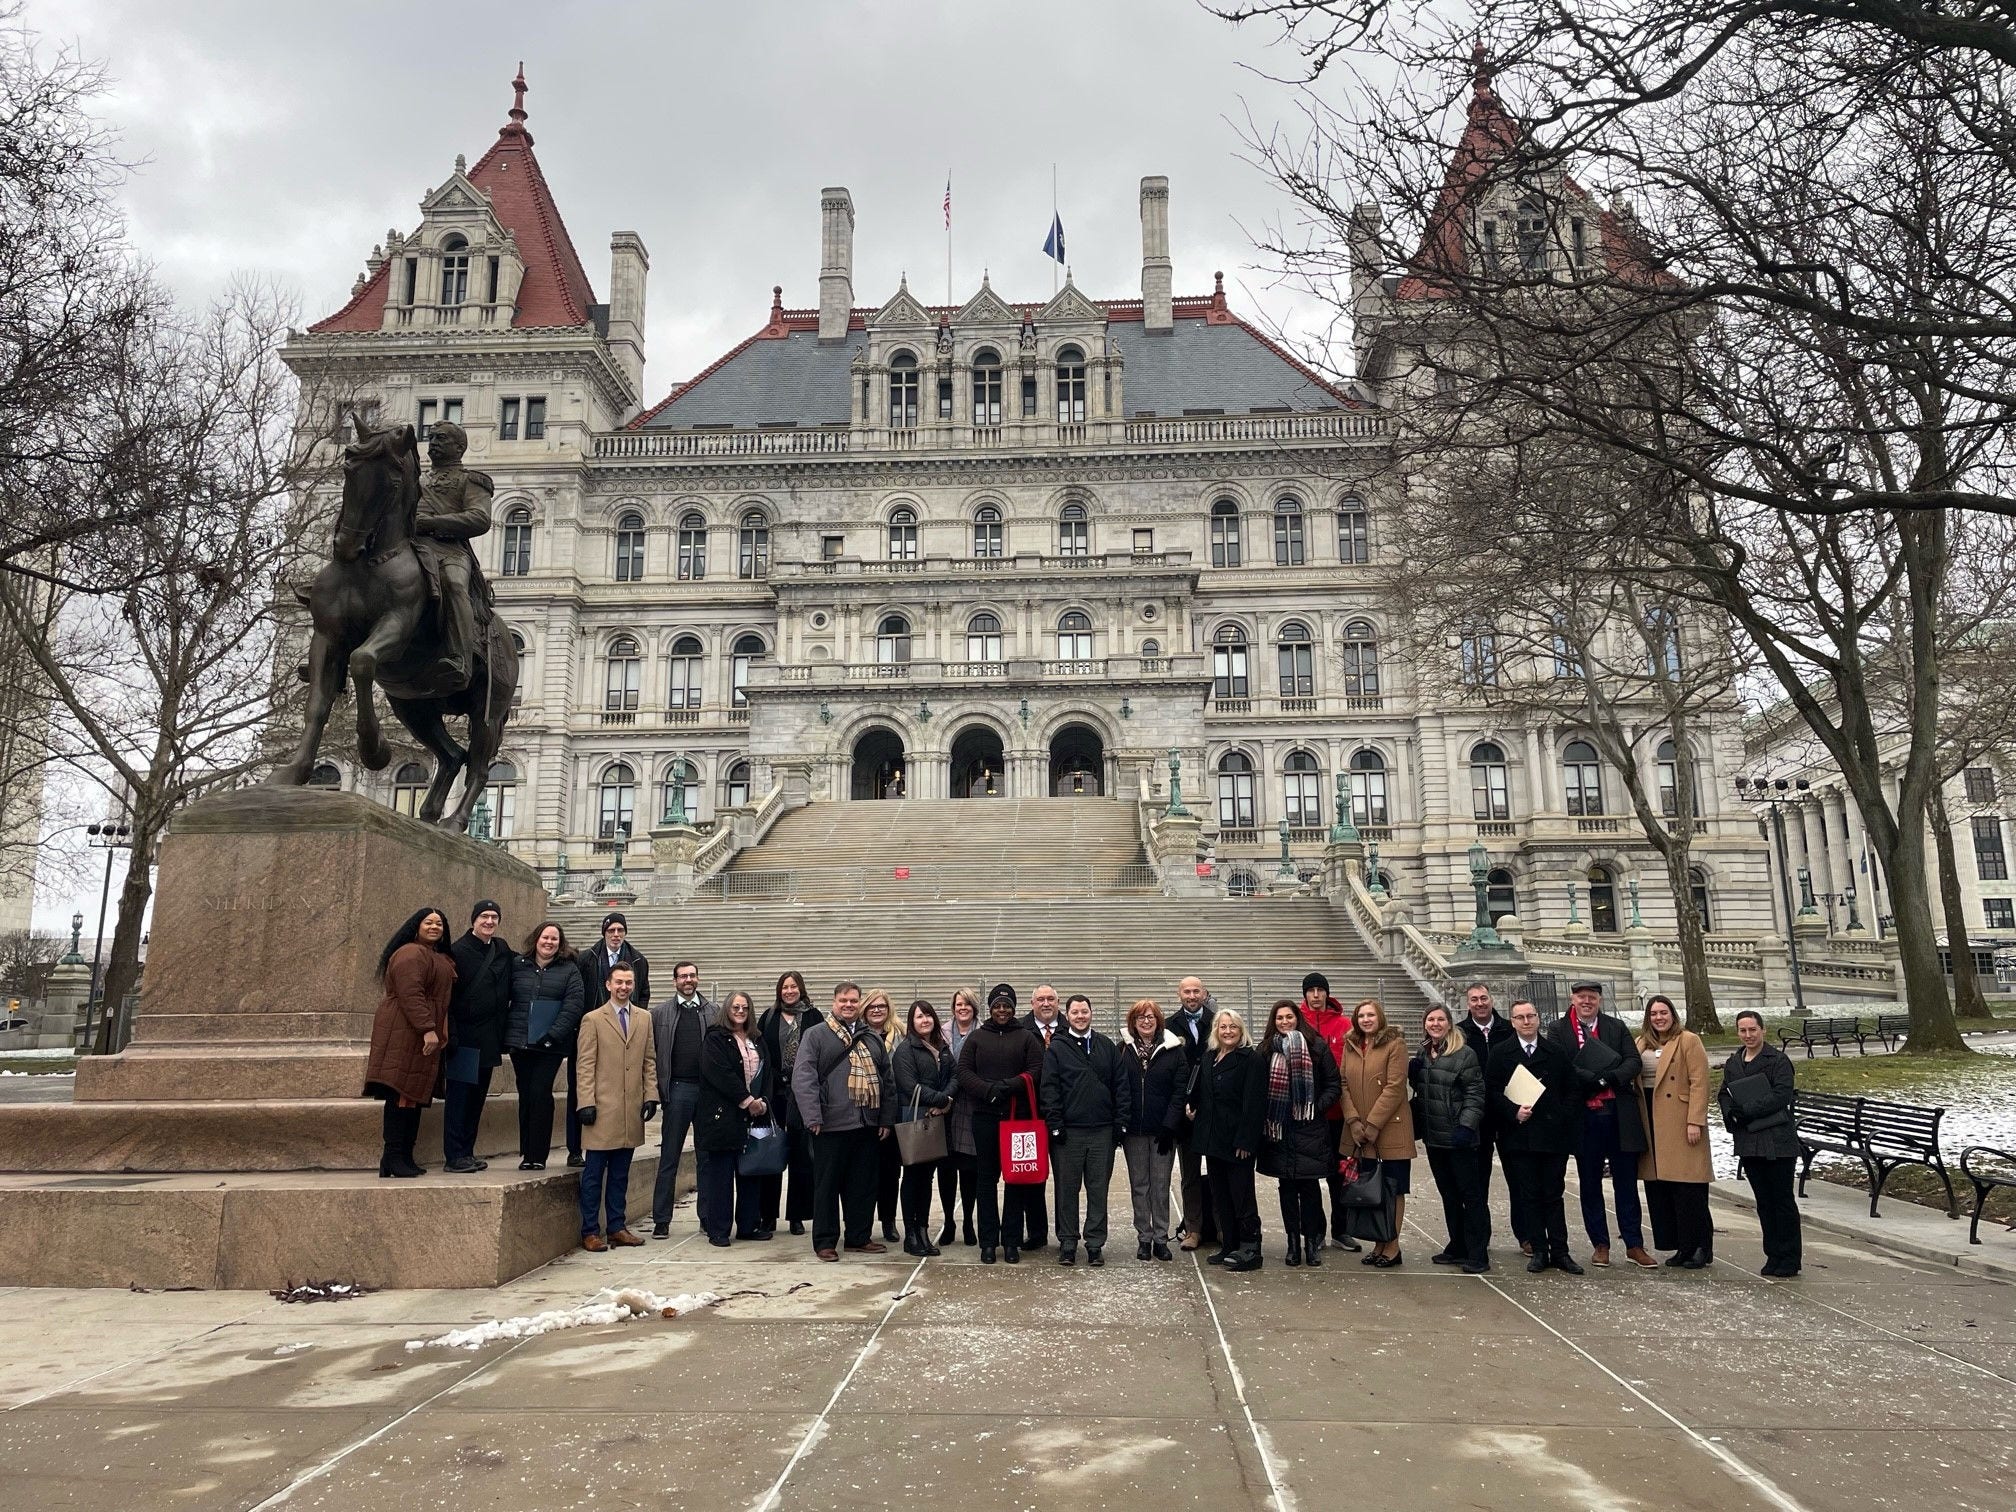 shrm members in front of NY state capitol building